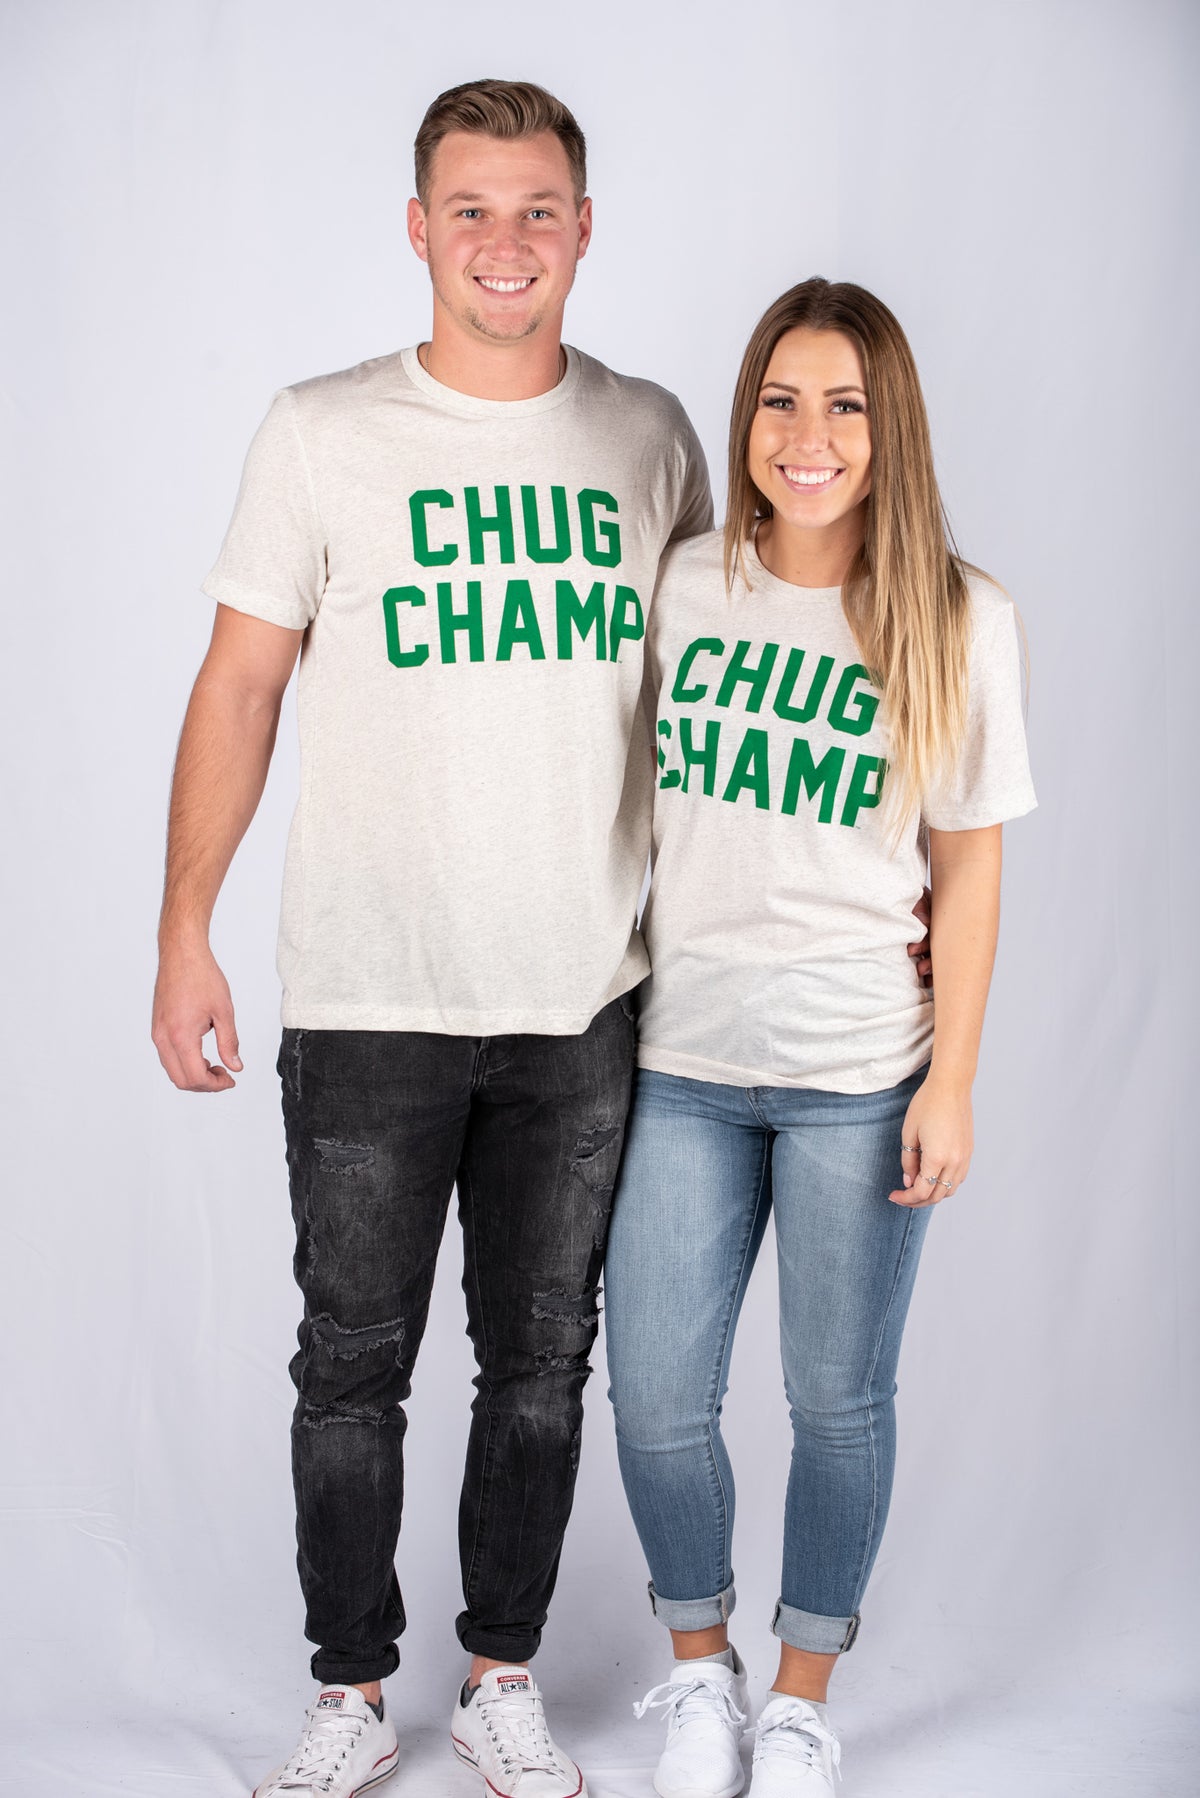 Chug Champ Unisex T-shirt Oatmeal - Stylish T-shirts - Trendy Graphic T-Shirts and Tank Tops at Lush Fashion Lounge Boutique in Oklahoma City